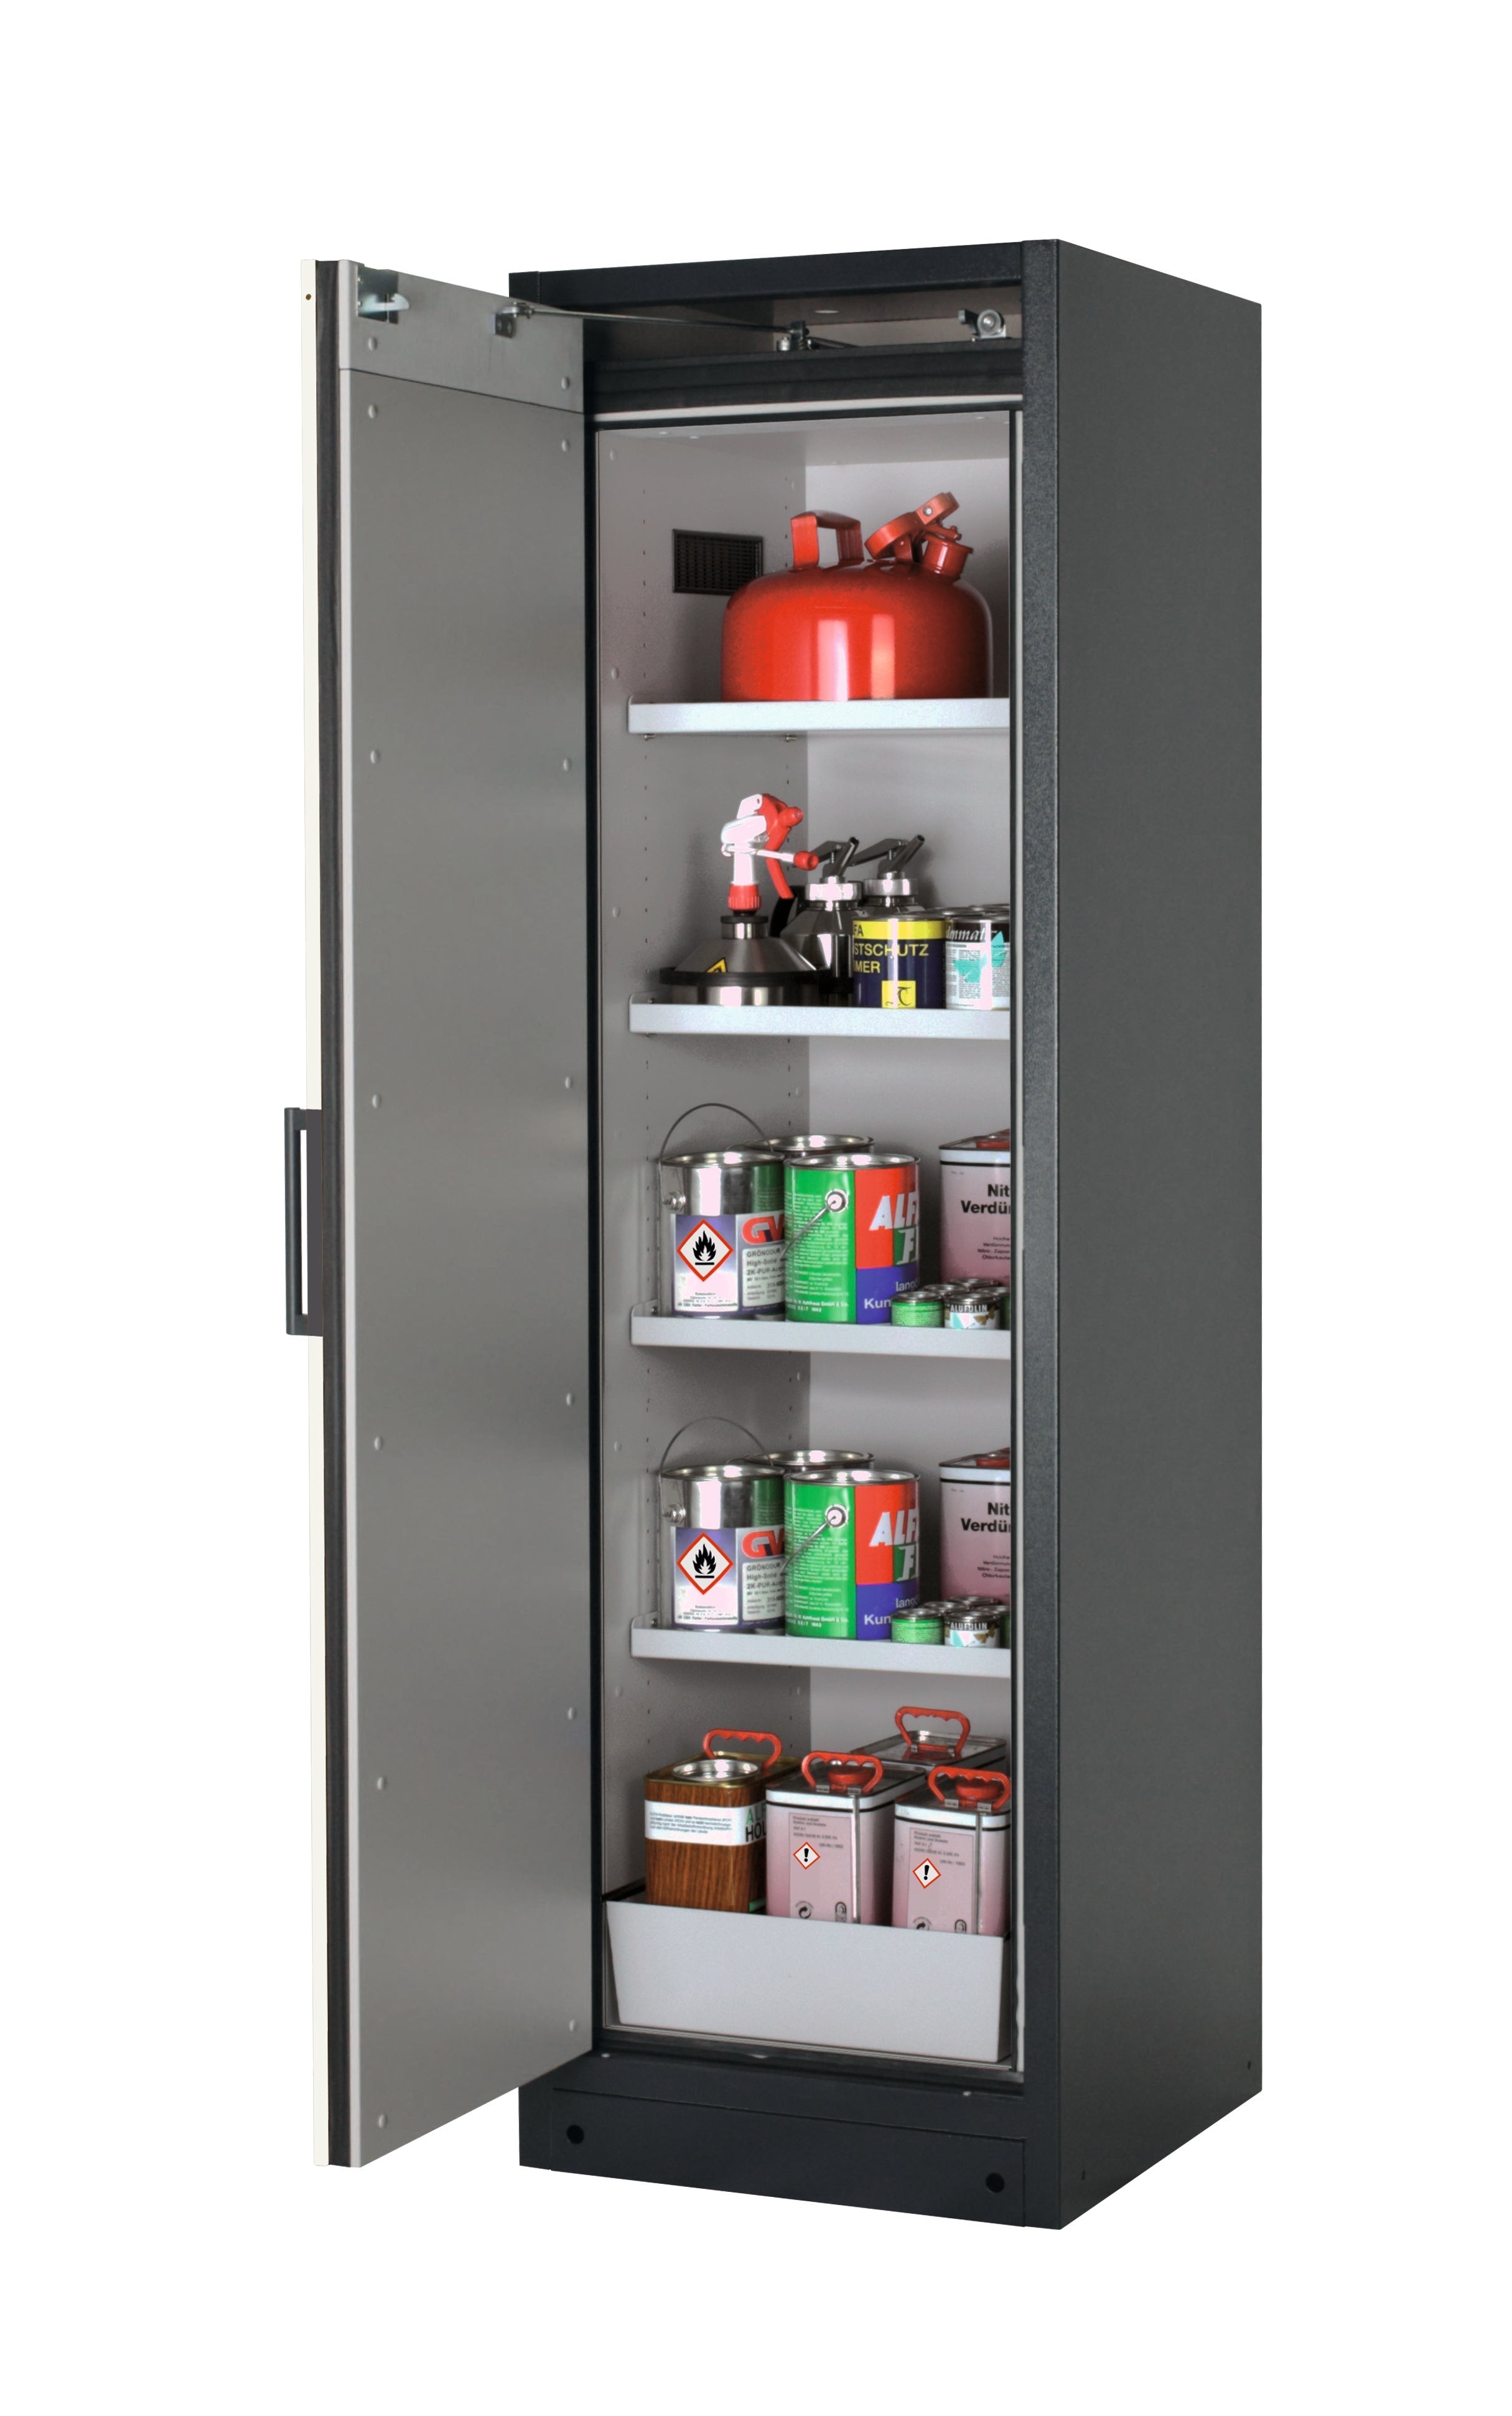 Type 90 safety storage cabinet Q-CLASSIC-90 model Q90.195.060 in asecos silver with 4x shelf standard (sheet steel),